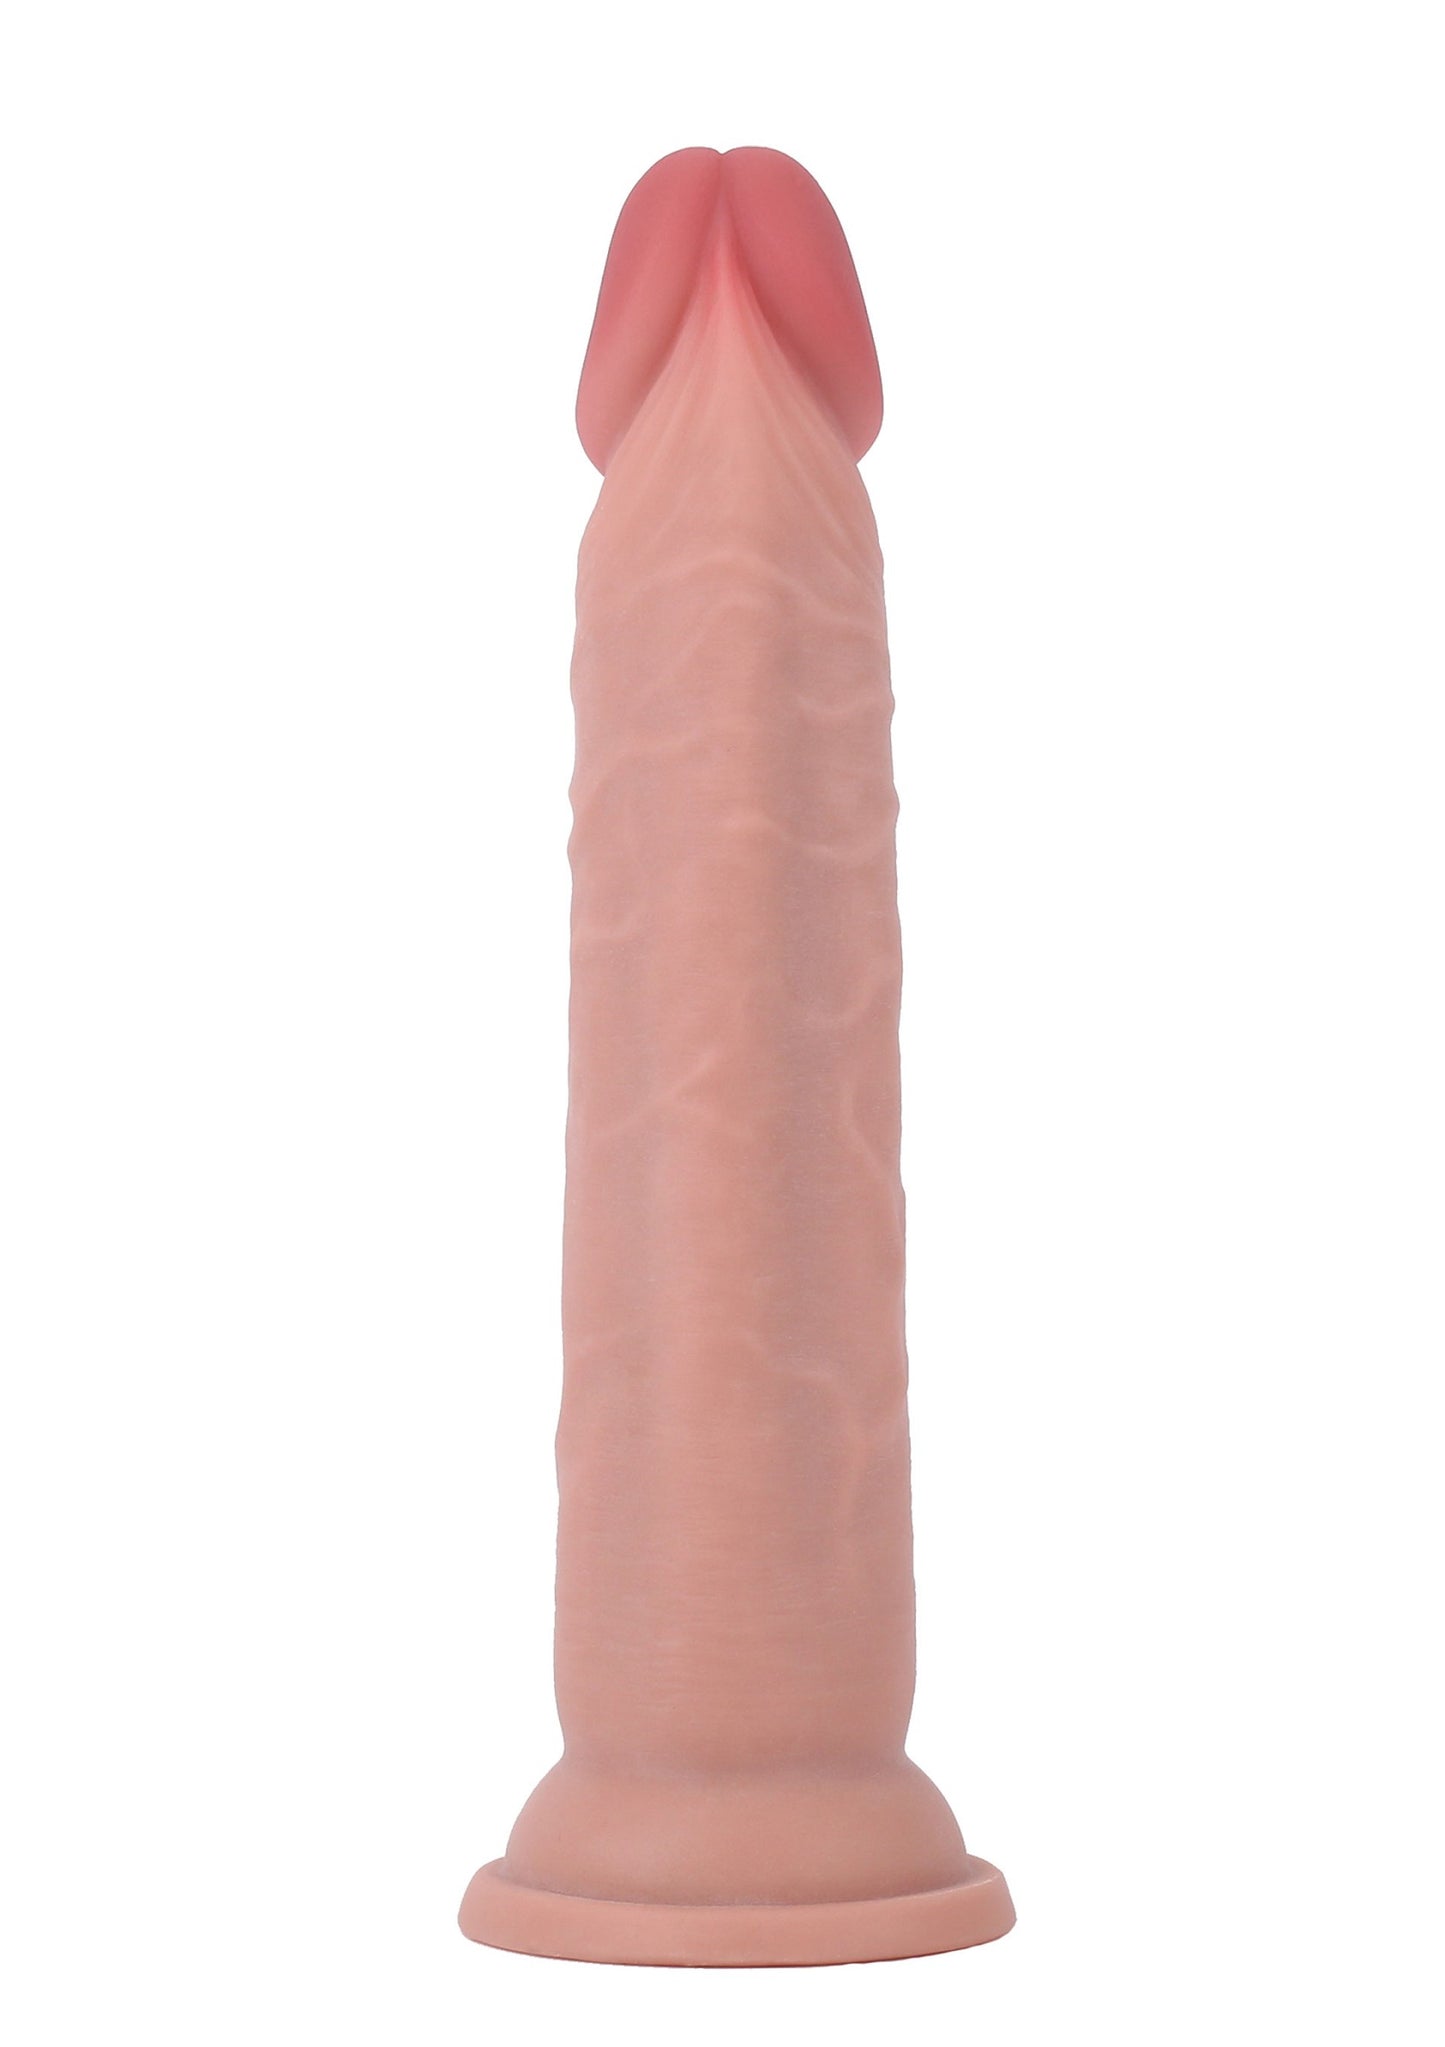 ToyJoy Get Real Deluxe Dual Density Dong 8' SKIN - 4